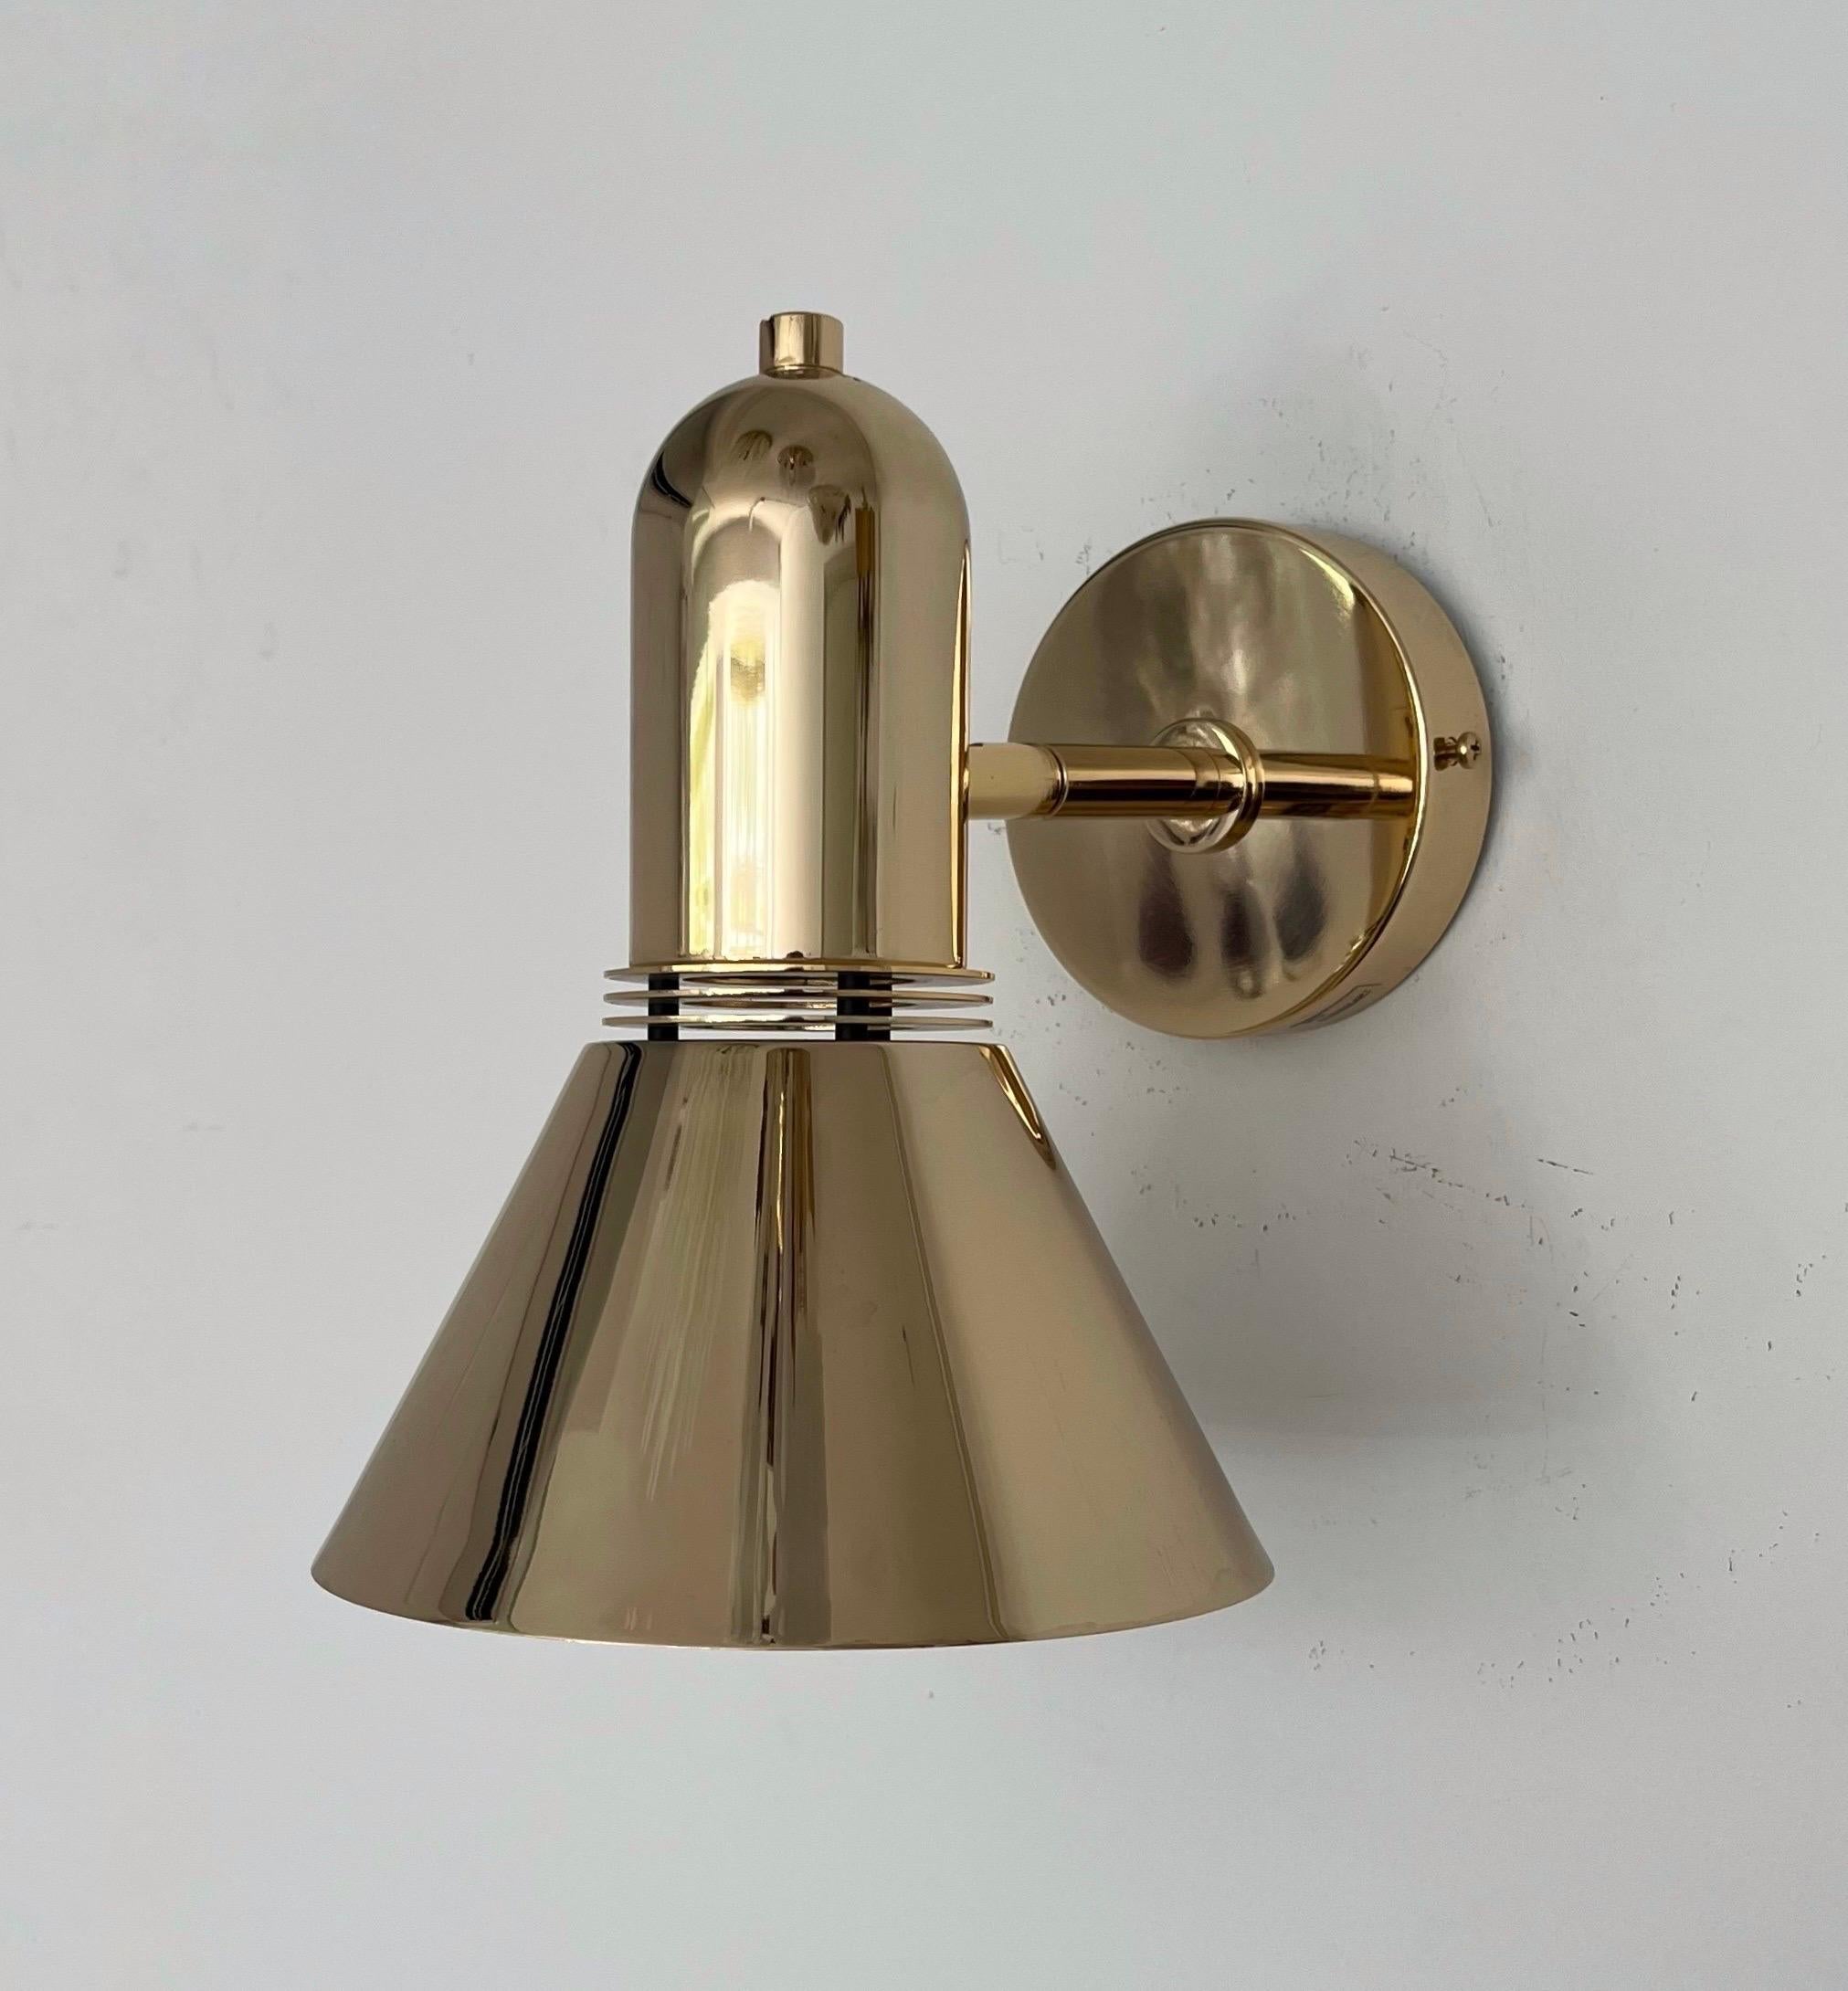 Beautiful and pretty Mid-century Pair of Gold Metal Wall Sconces by Leonardo Marelli for Estiluz from 1970s.
These Lamps were designed and manufactured in Barcelona (Spain) by Estiluz during 1980s. These Wall Sconces have NEVER been used, perfect